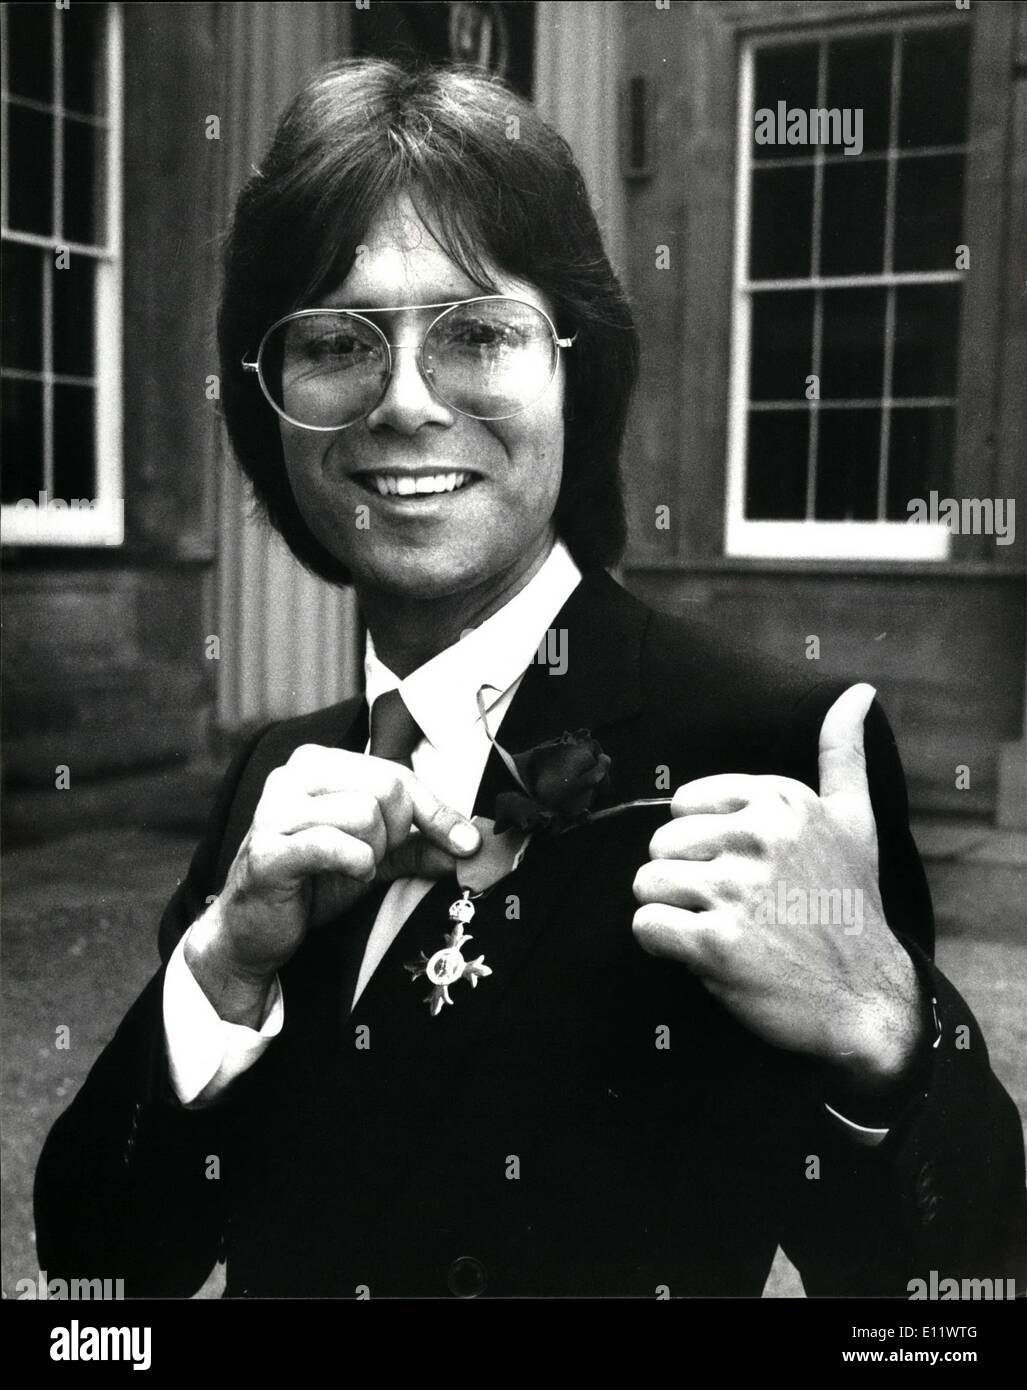 Jun. 06, 1980 - Cliff Richard Collects His Obe: Today pop singer Cliff Richard went to Buckingham Palace for the Investiture and received his OBE from Te Queen. Picture shows: Cliff Richard shows off his Obe as he left Buckingham Palace today. Stock Photo